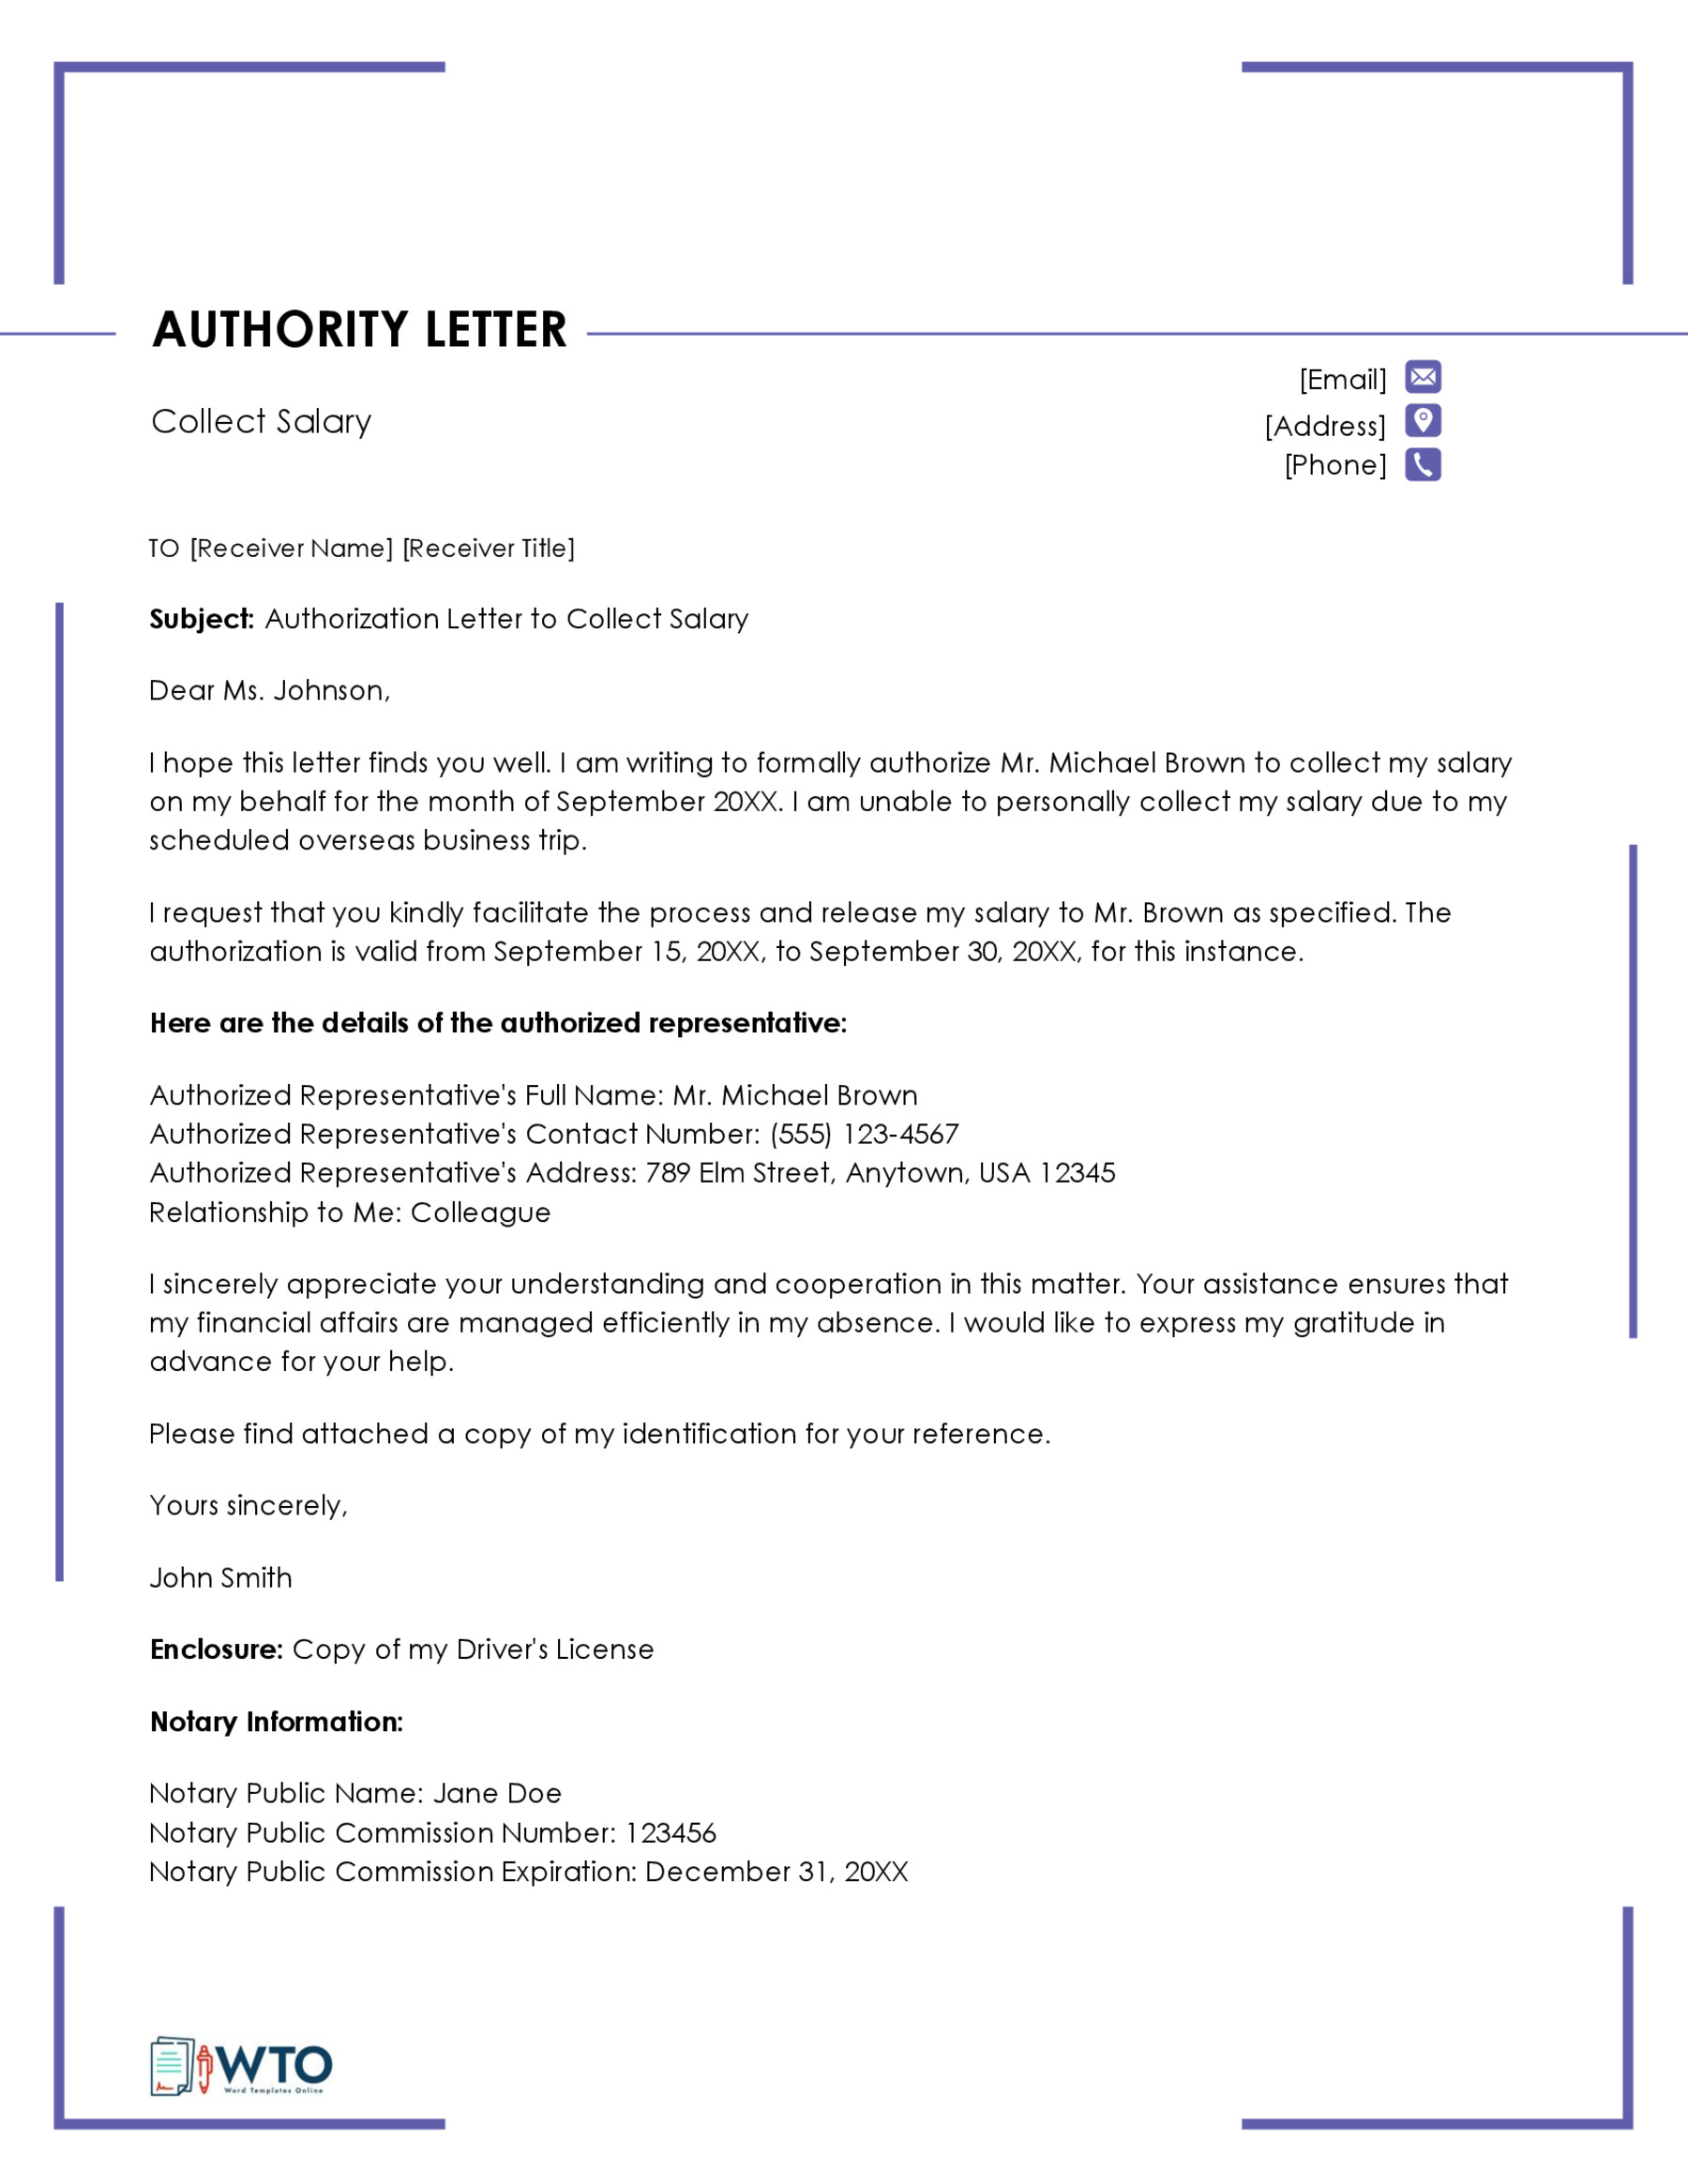 Letter to Collect Salary Template in ms word free download